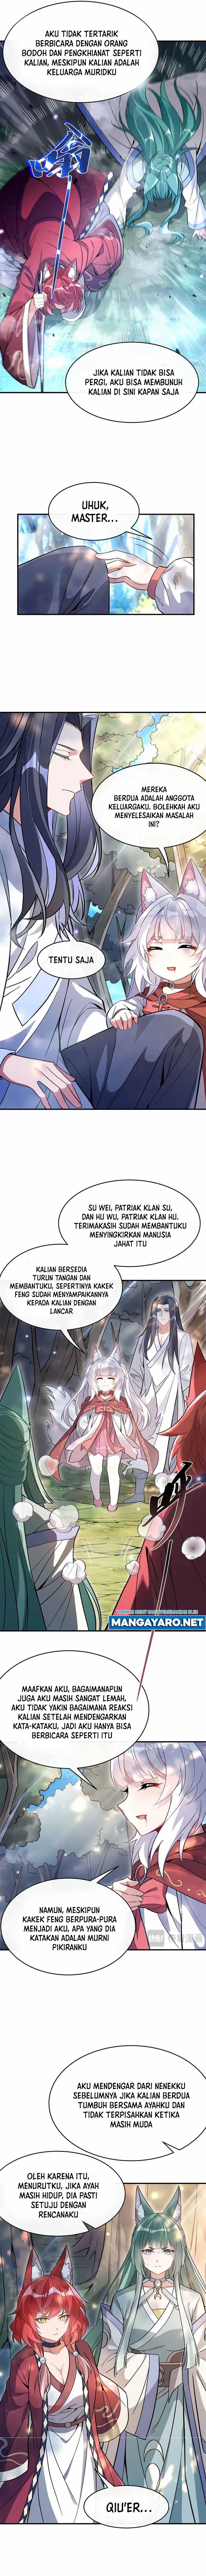 Dilarang COPAS - situs resmi www.mangacanblog.com - Komik my female apprentices are all big shots from the future 221 - chapter 221 222 Indonesia my female apprentices are all big shots from the future 221 - chapter 221 Terbaru 7|Baca Manga Komik Indonesia|Mangacan